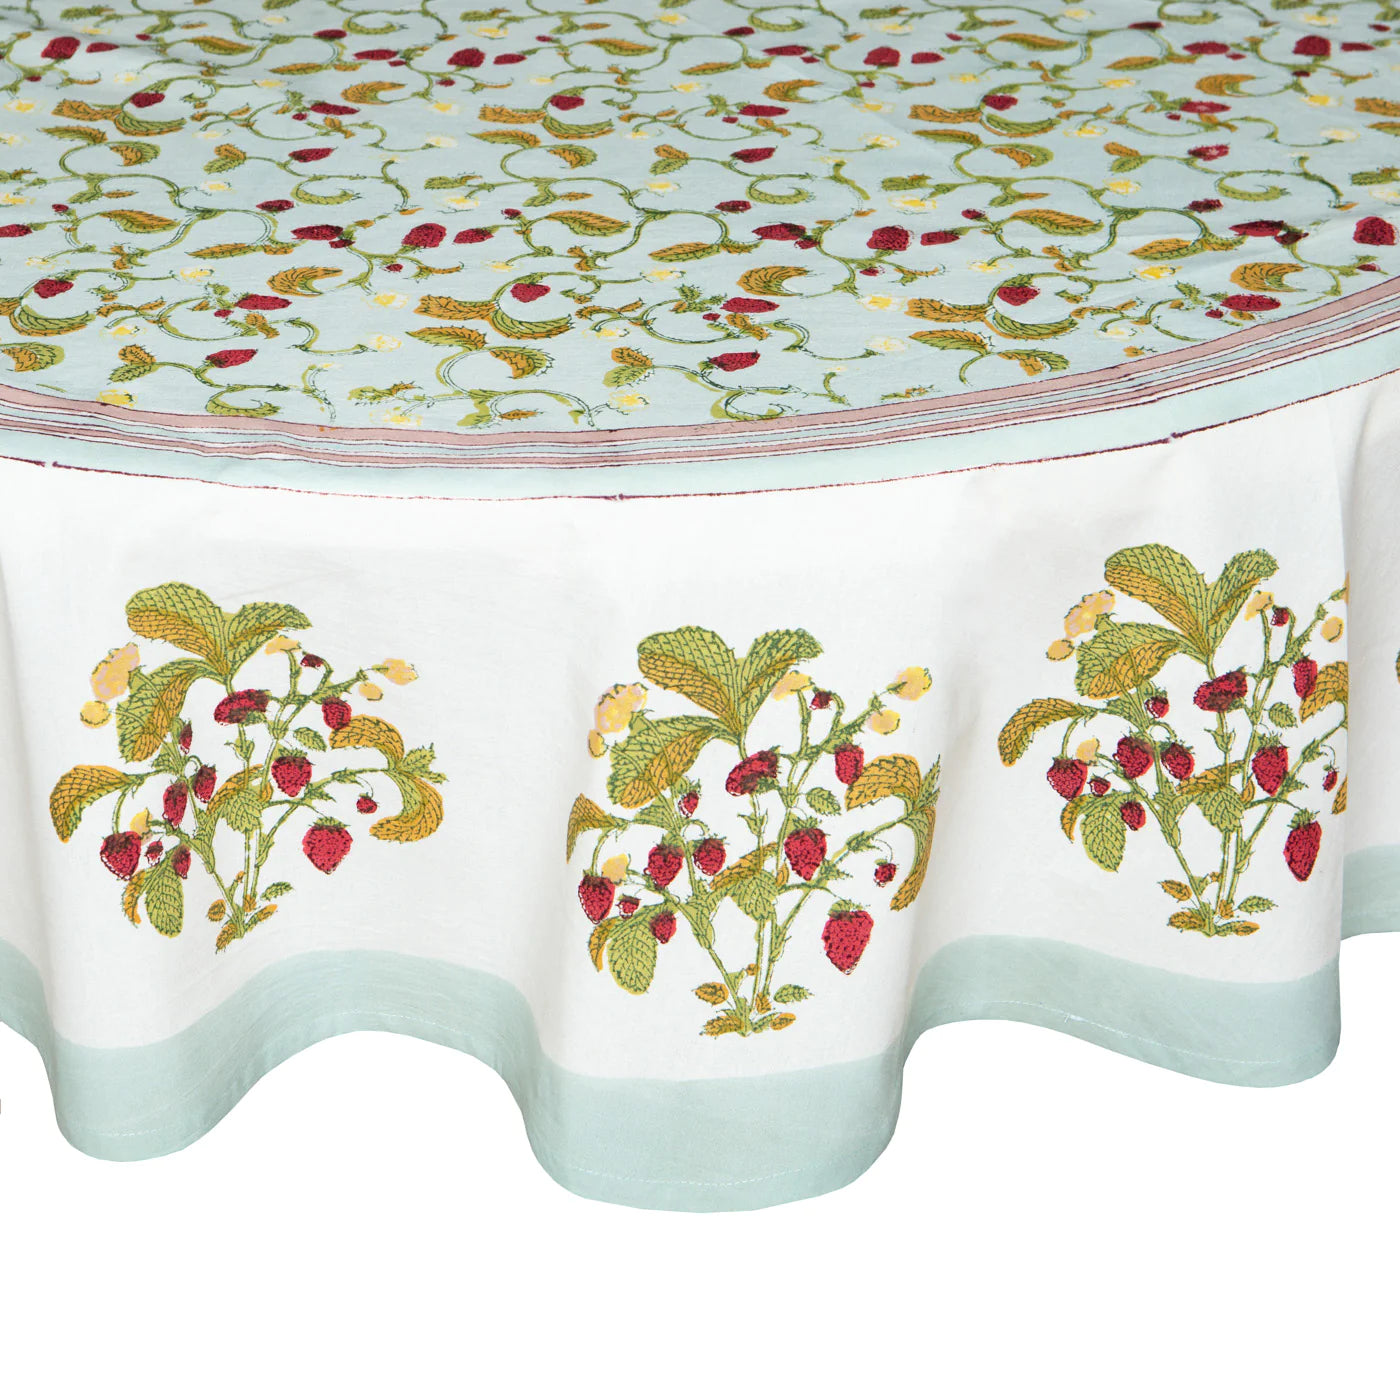 Wild Strawberries Tablecloth